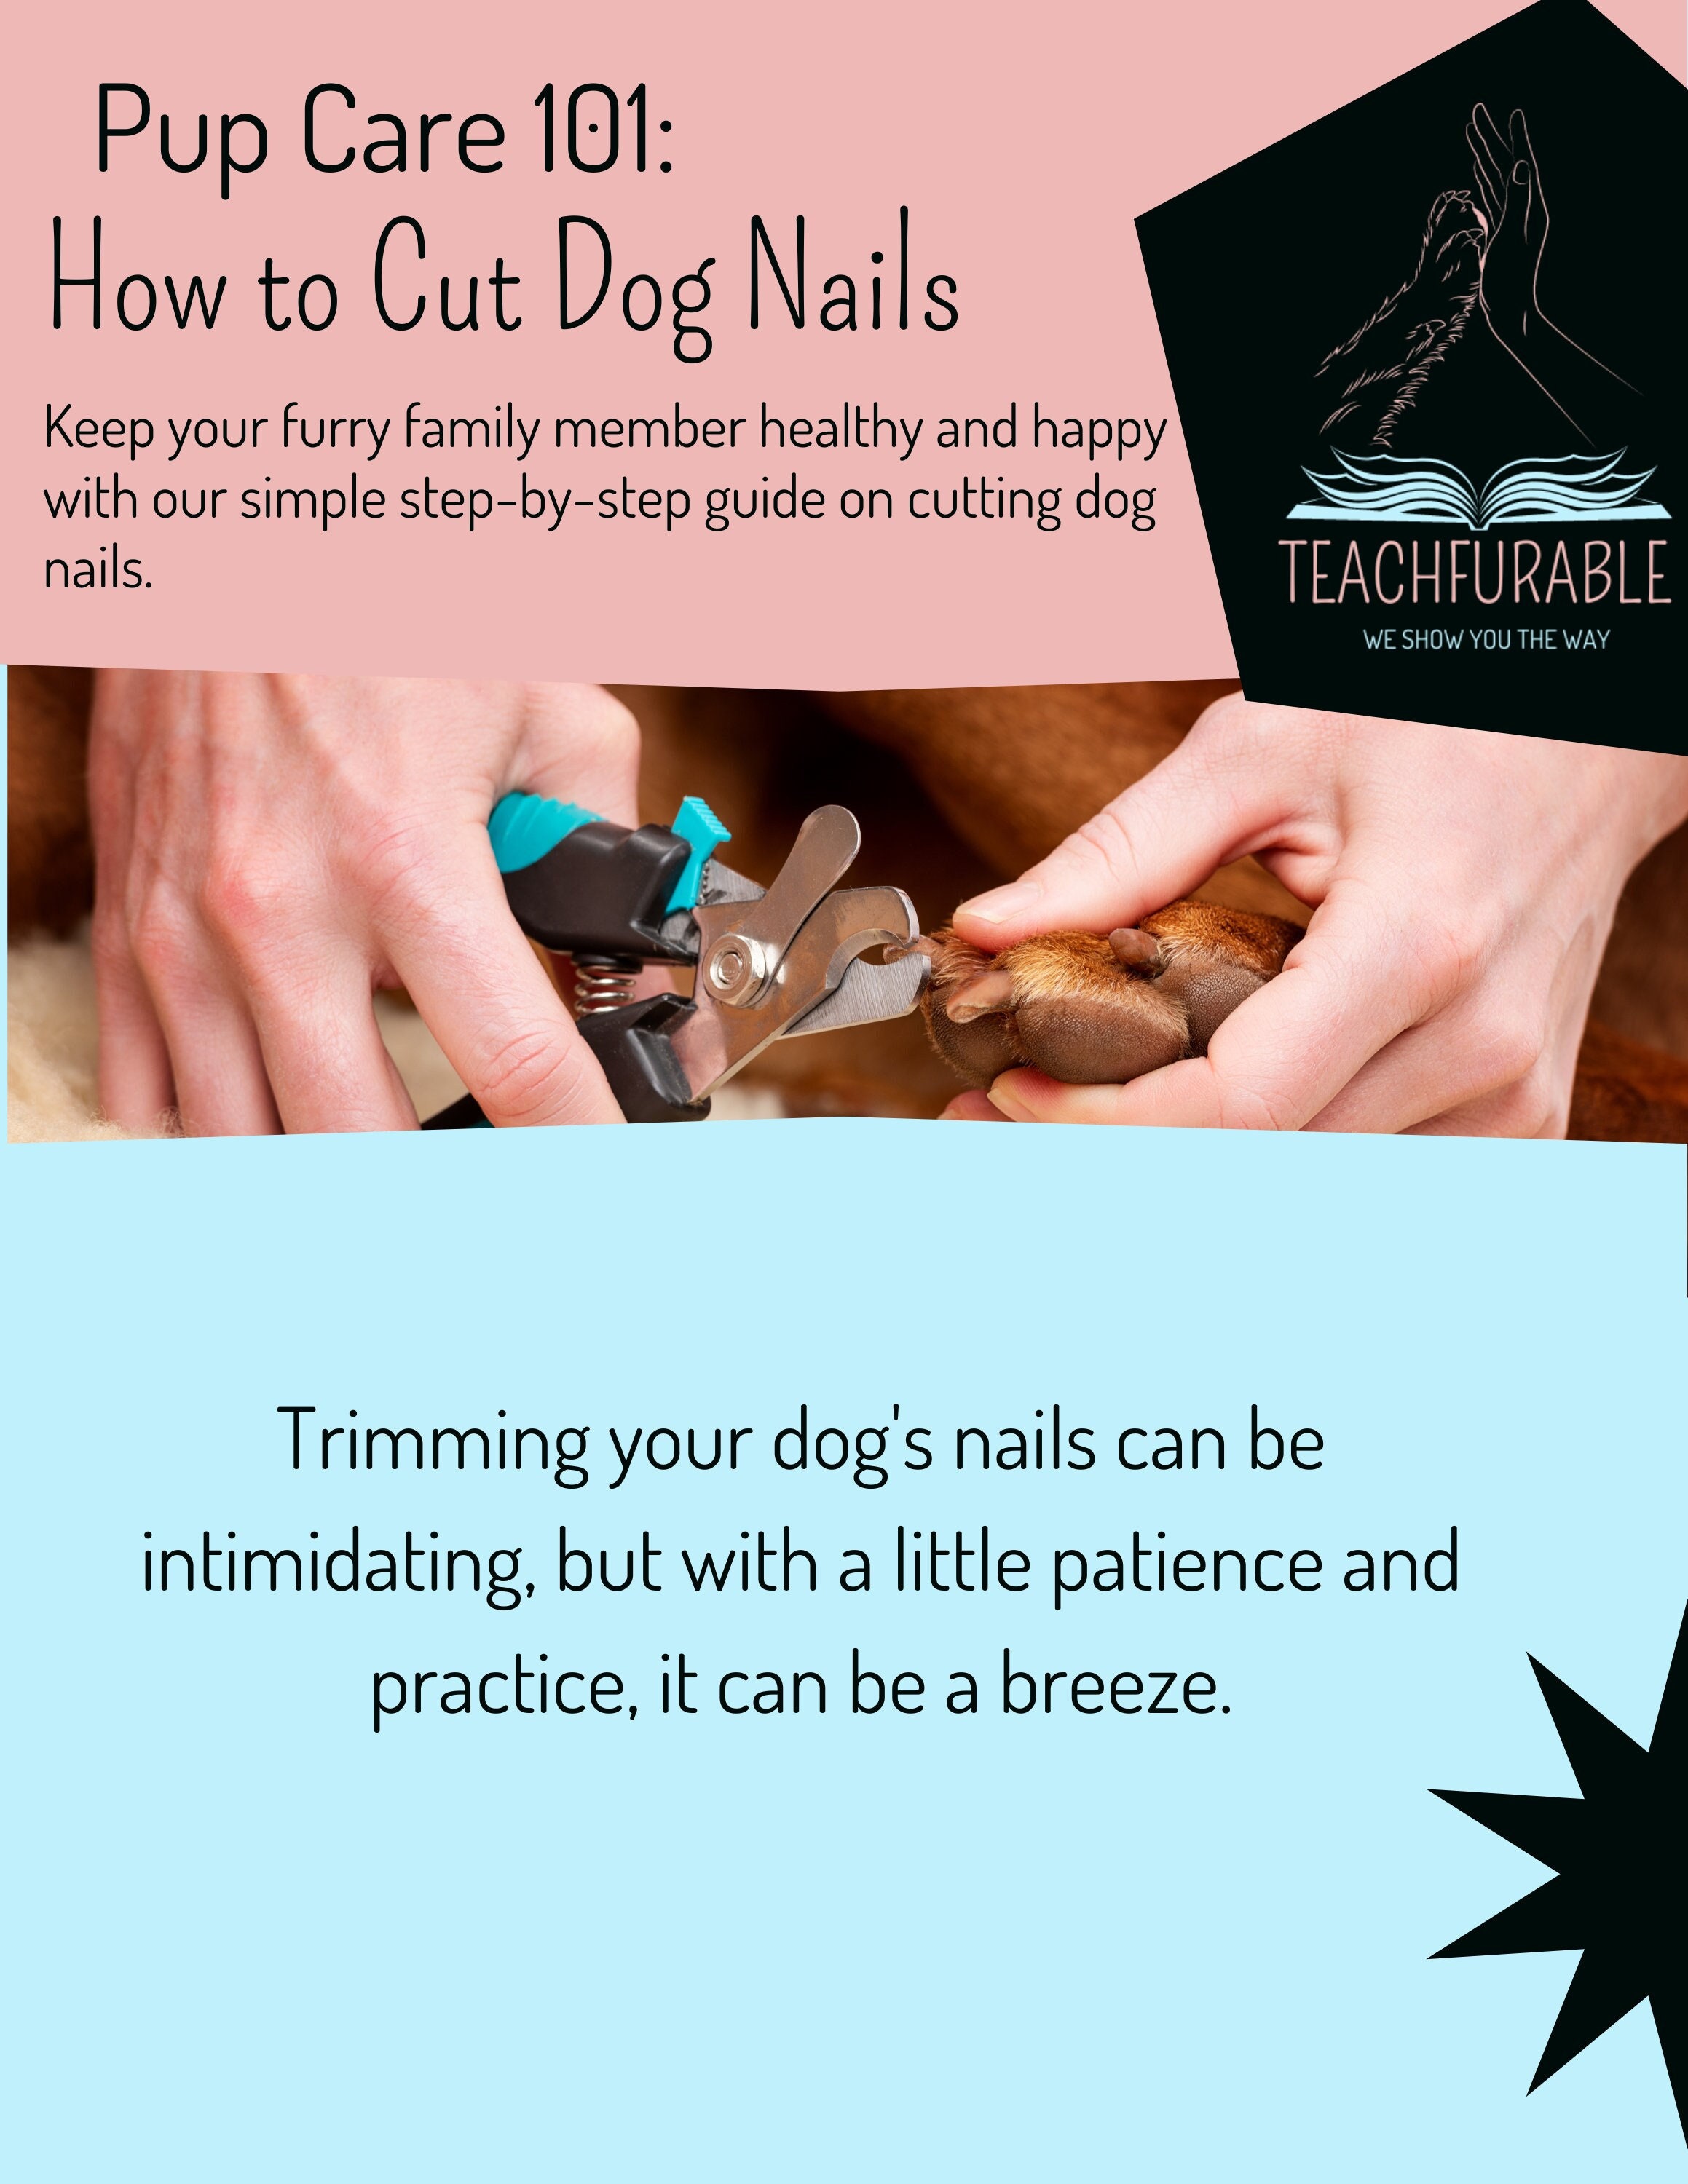 Clipping Your Dog's Nails - Timberidge Goldendoodles